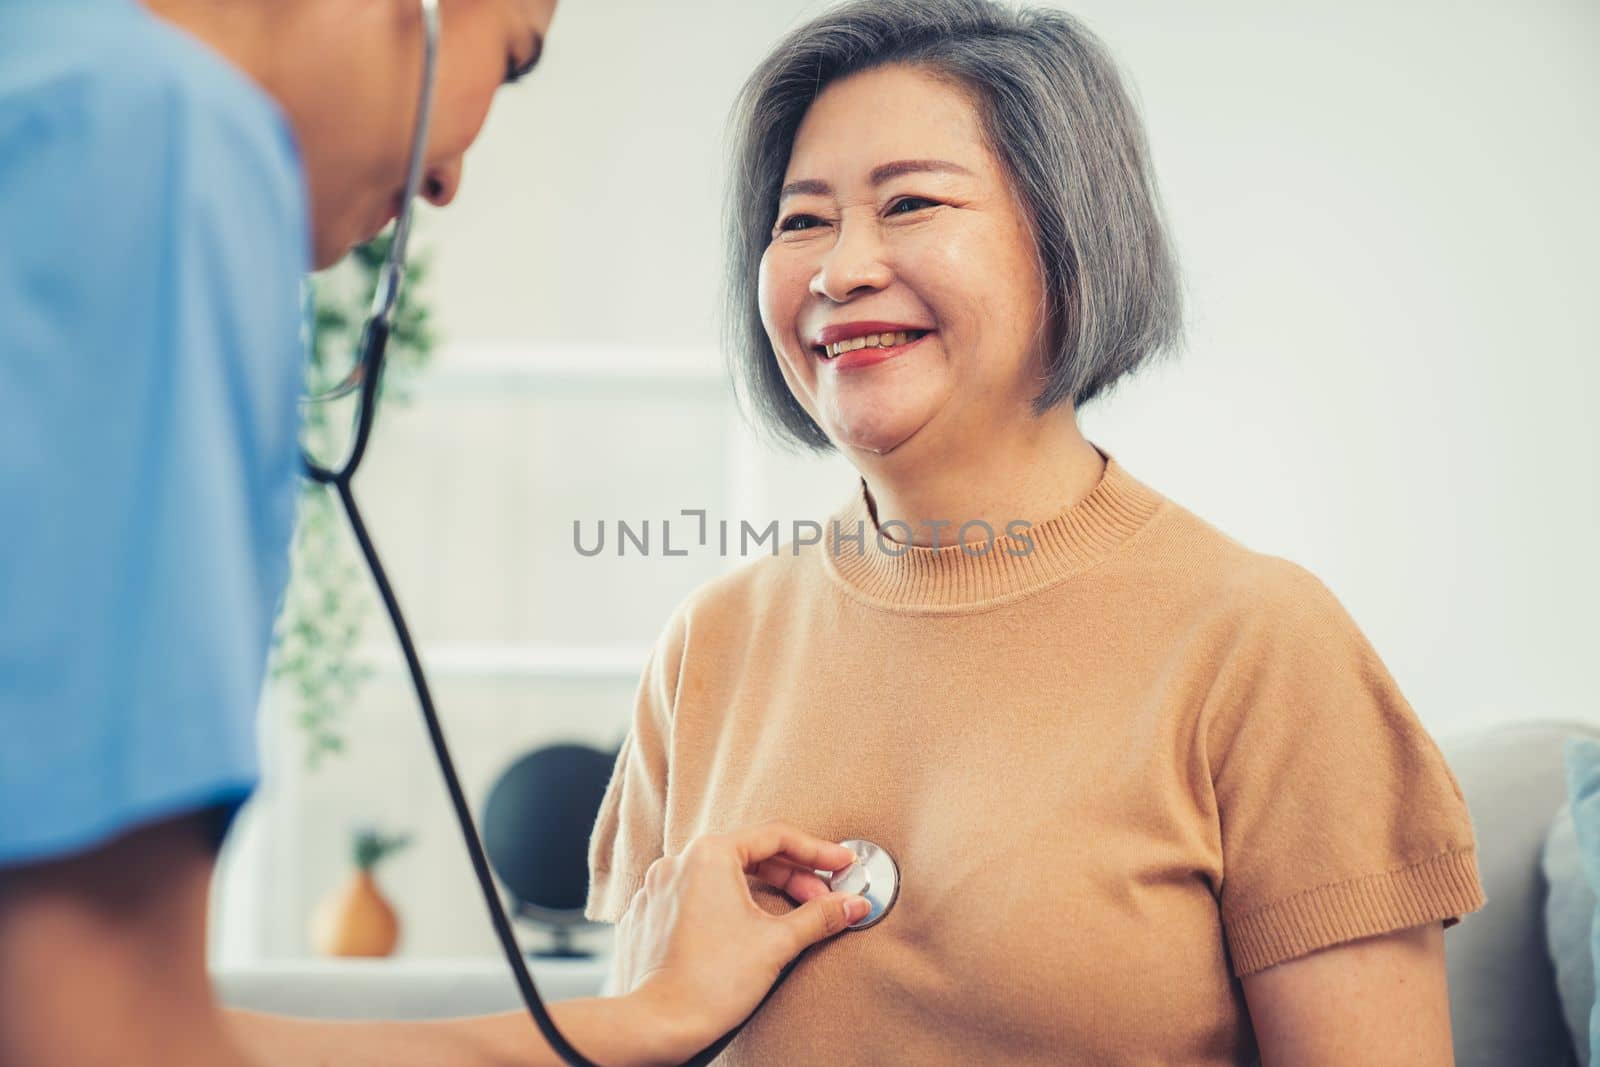 A contented retired senior woman being exterminated by her caregiver with a stethoscope at home. Medical care service, senior care at home.